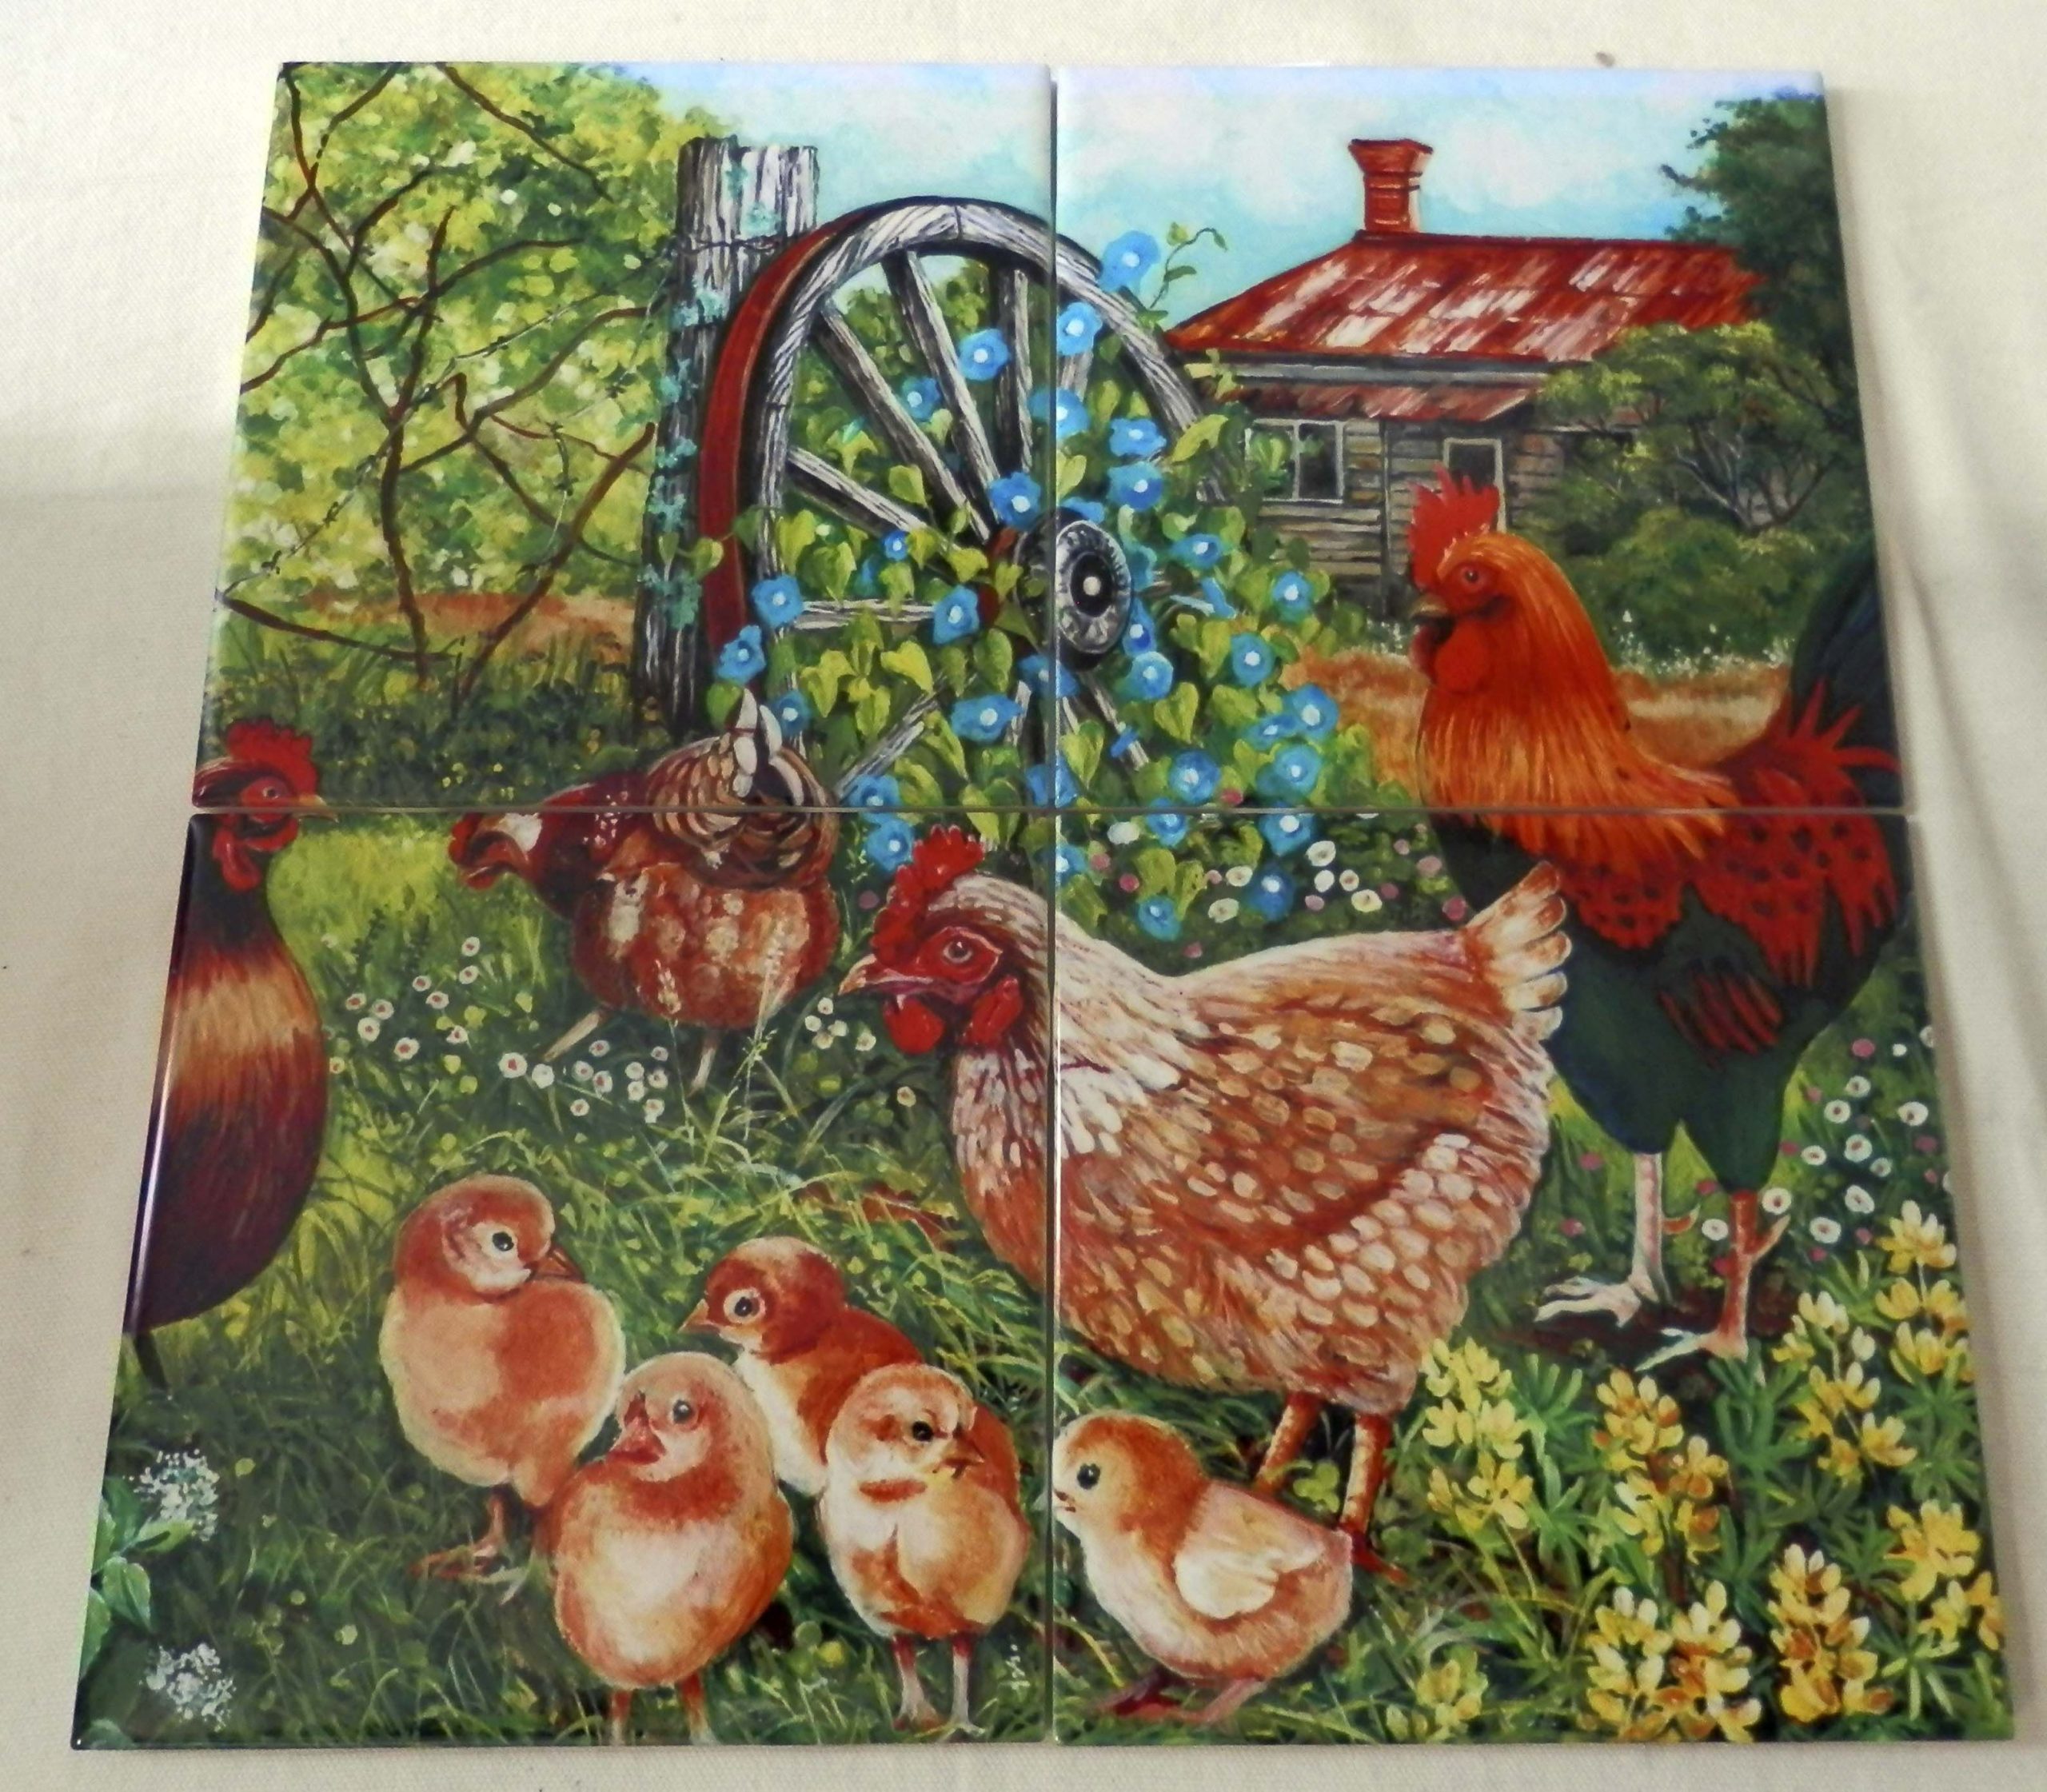 Decorative Tile With Roosters-Farmyard Family Ii-Tile pour Rooster Kitchen Tile 